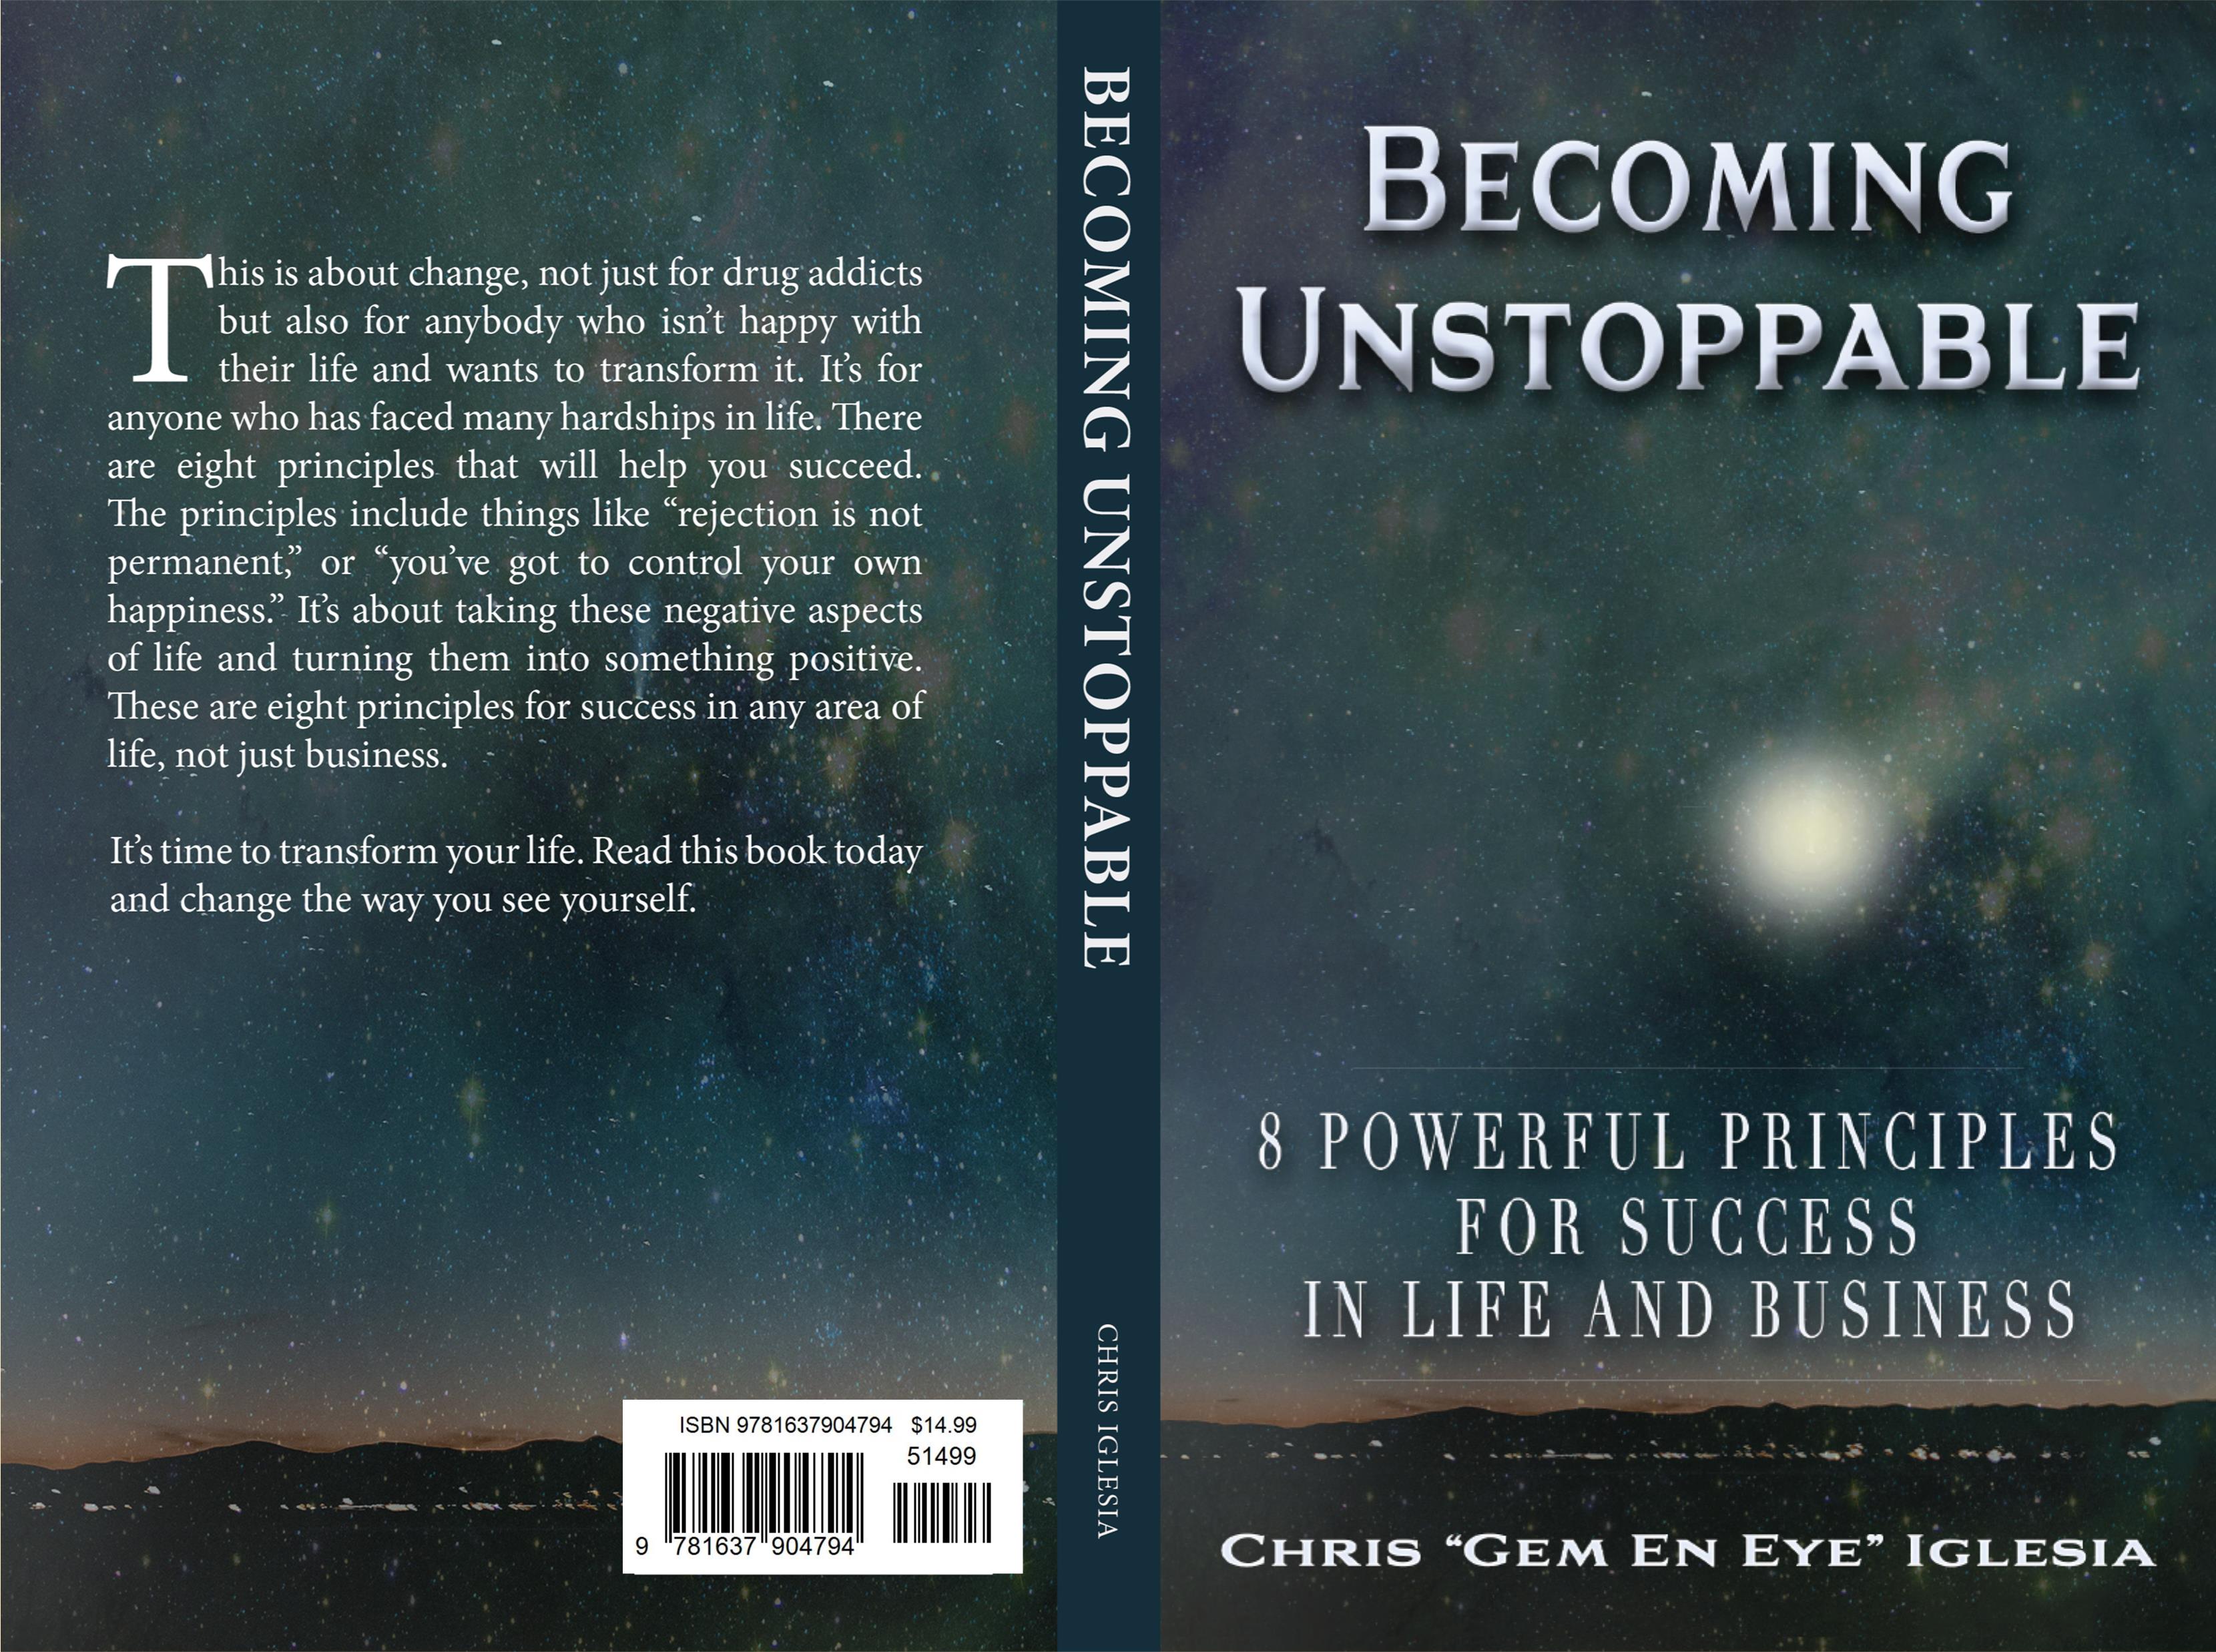 Becoming Unstoppable: 8 Powerful Principles for Success in Life and Business cover image